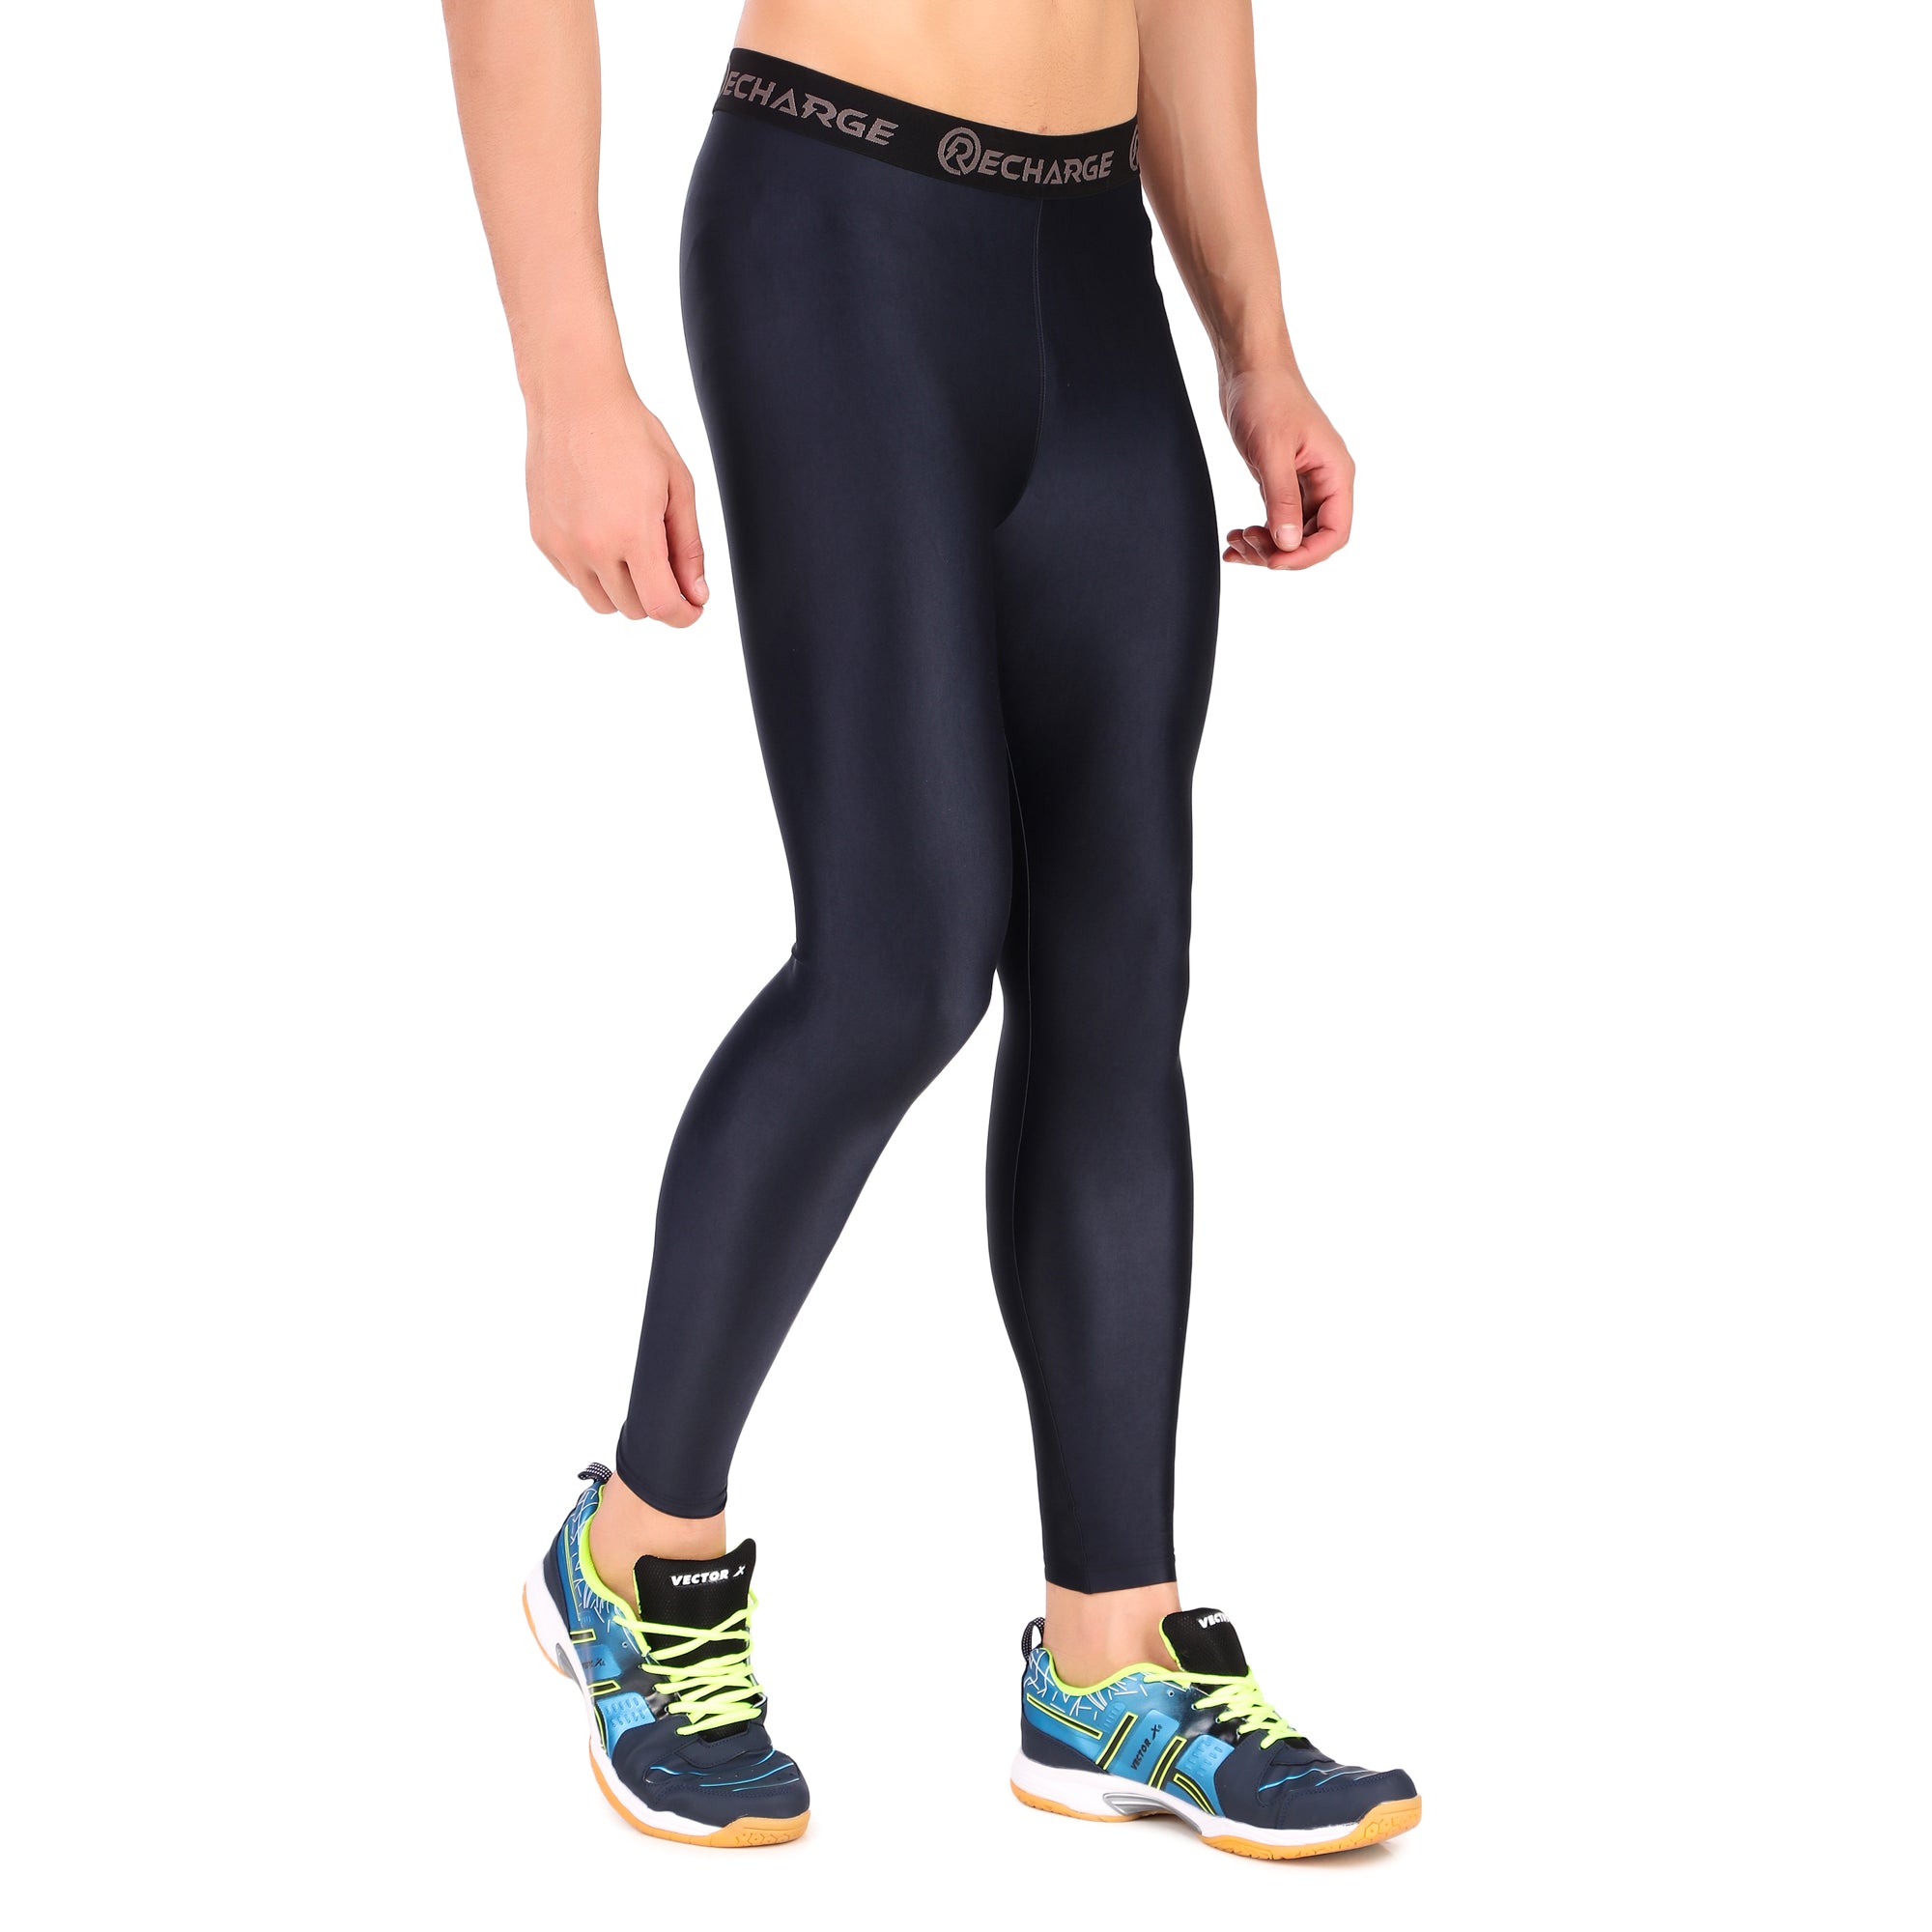 Recharge Polyester Compression Pant (Navy Blue)